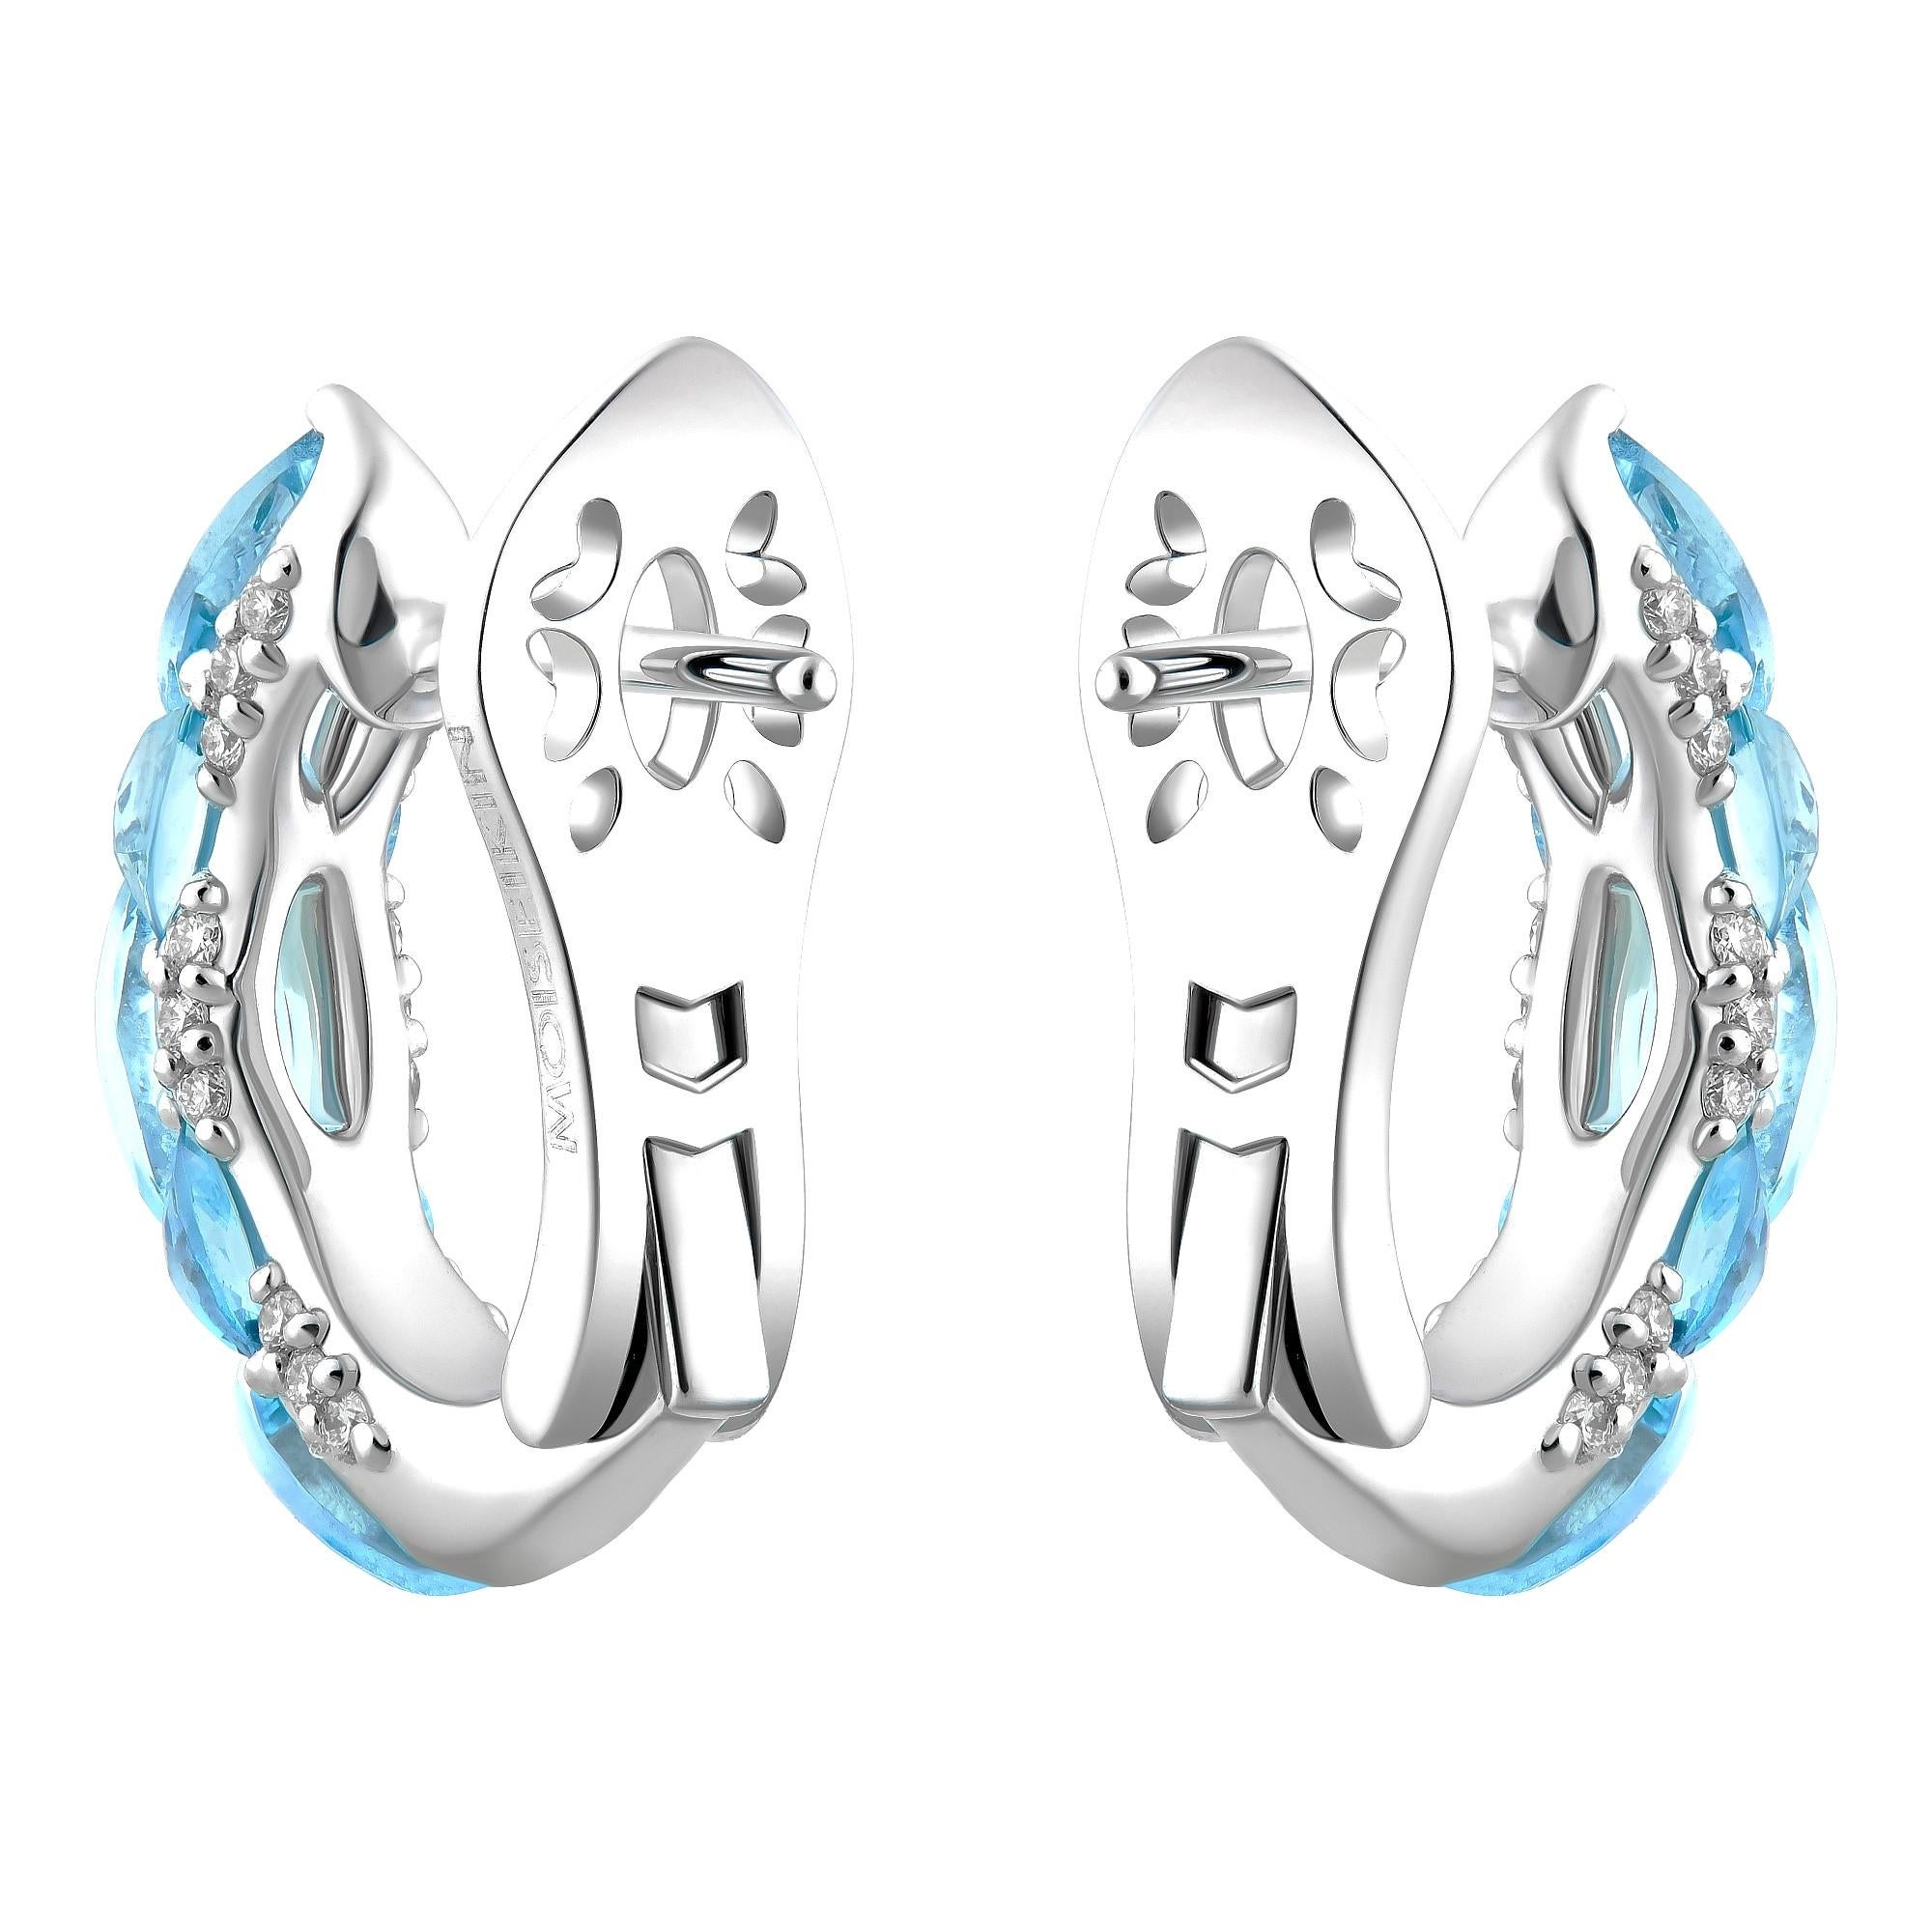 The exquisite elegant earrings from the MOISEIKIN's Harmony of Water collection is made of Santa Maria Aquamarines and shimmering diamonds.
The lightful harmony of aquamarines mounted in traditional and unique reverse settings creates intensive